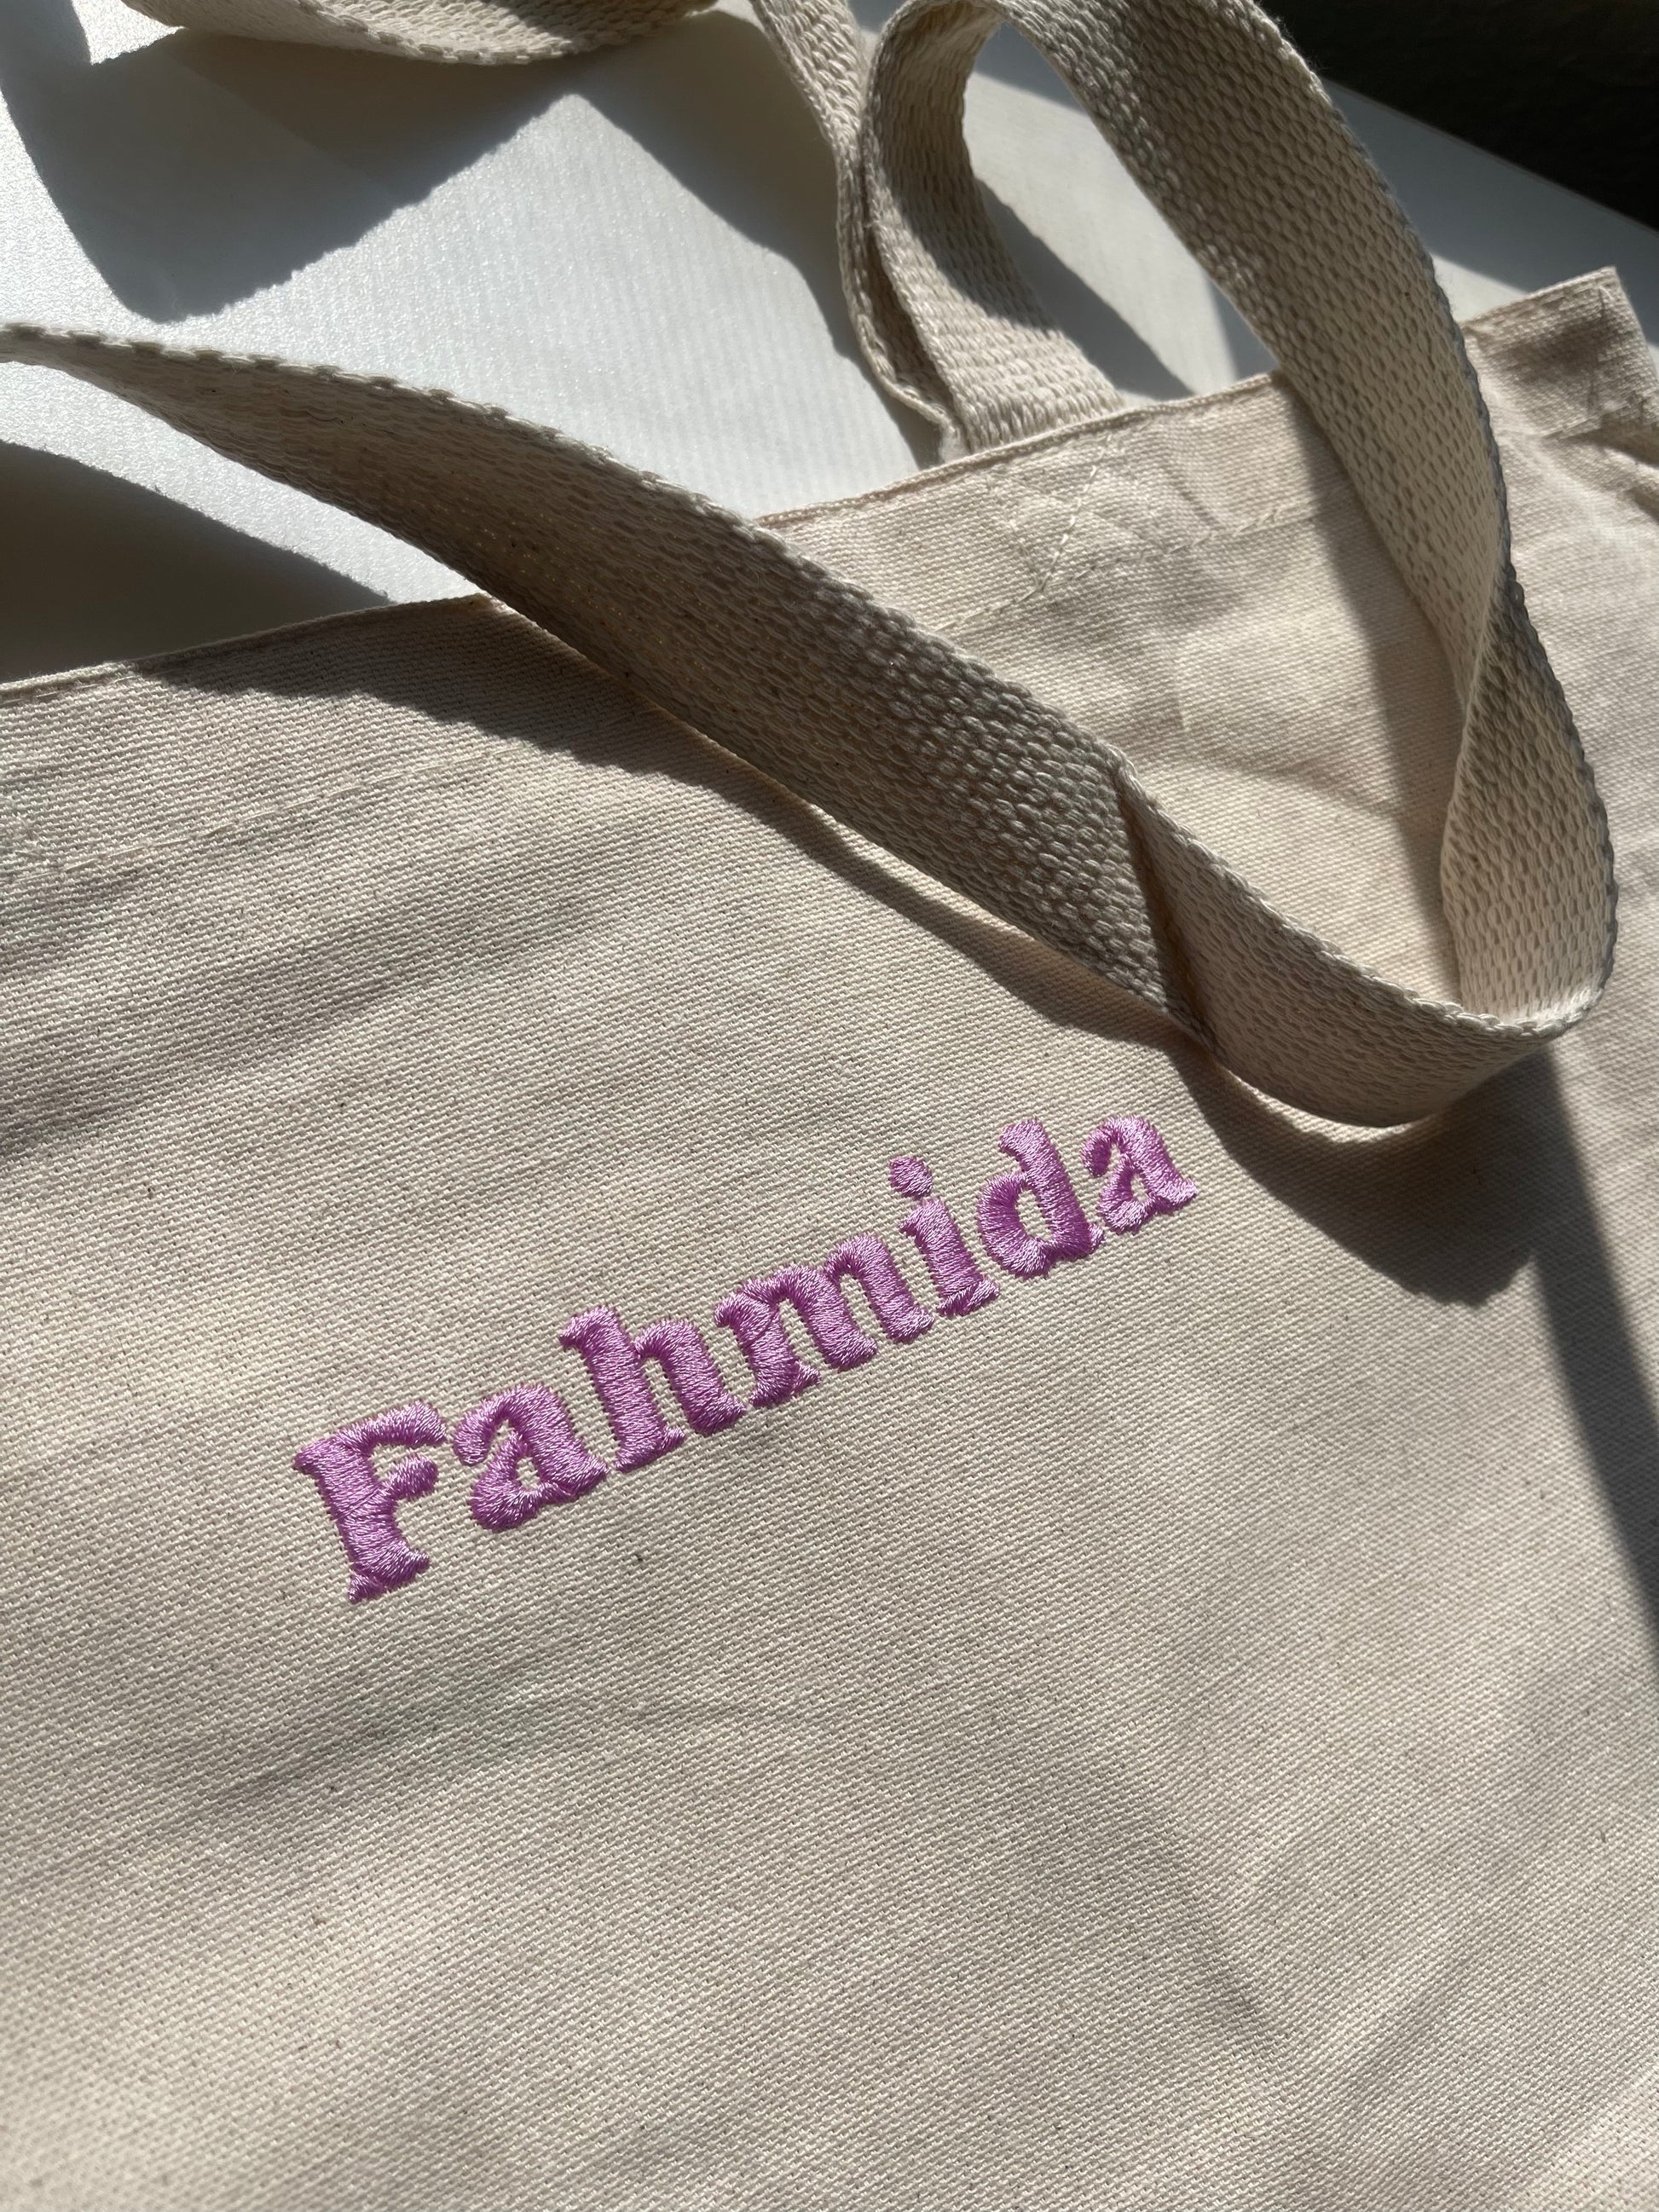 Personalized tote bag with the name or word of your choice